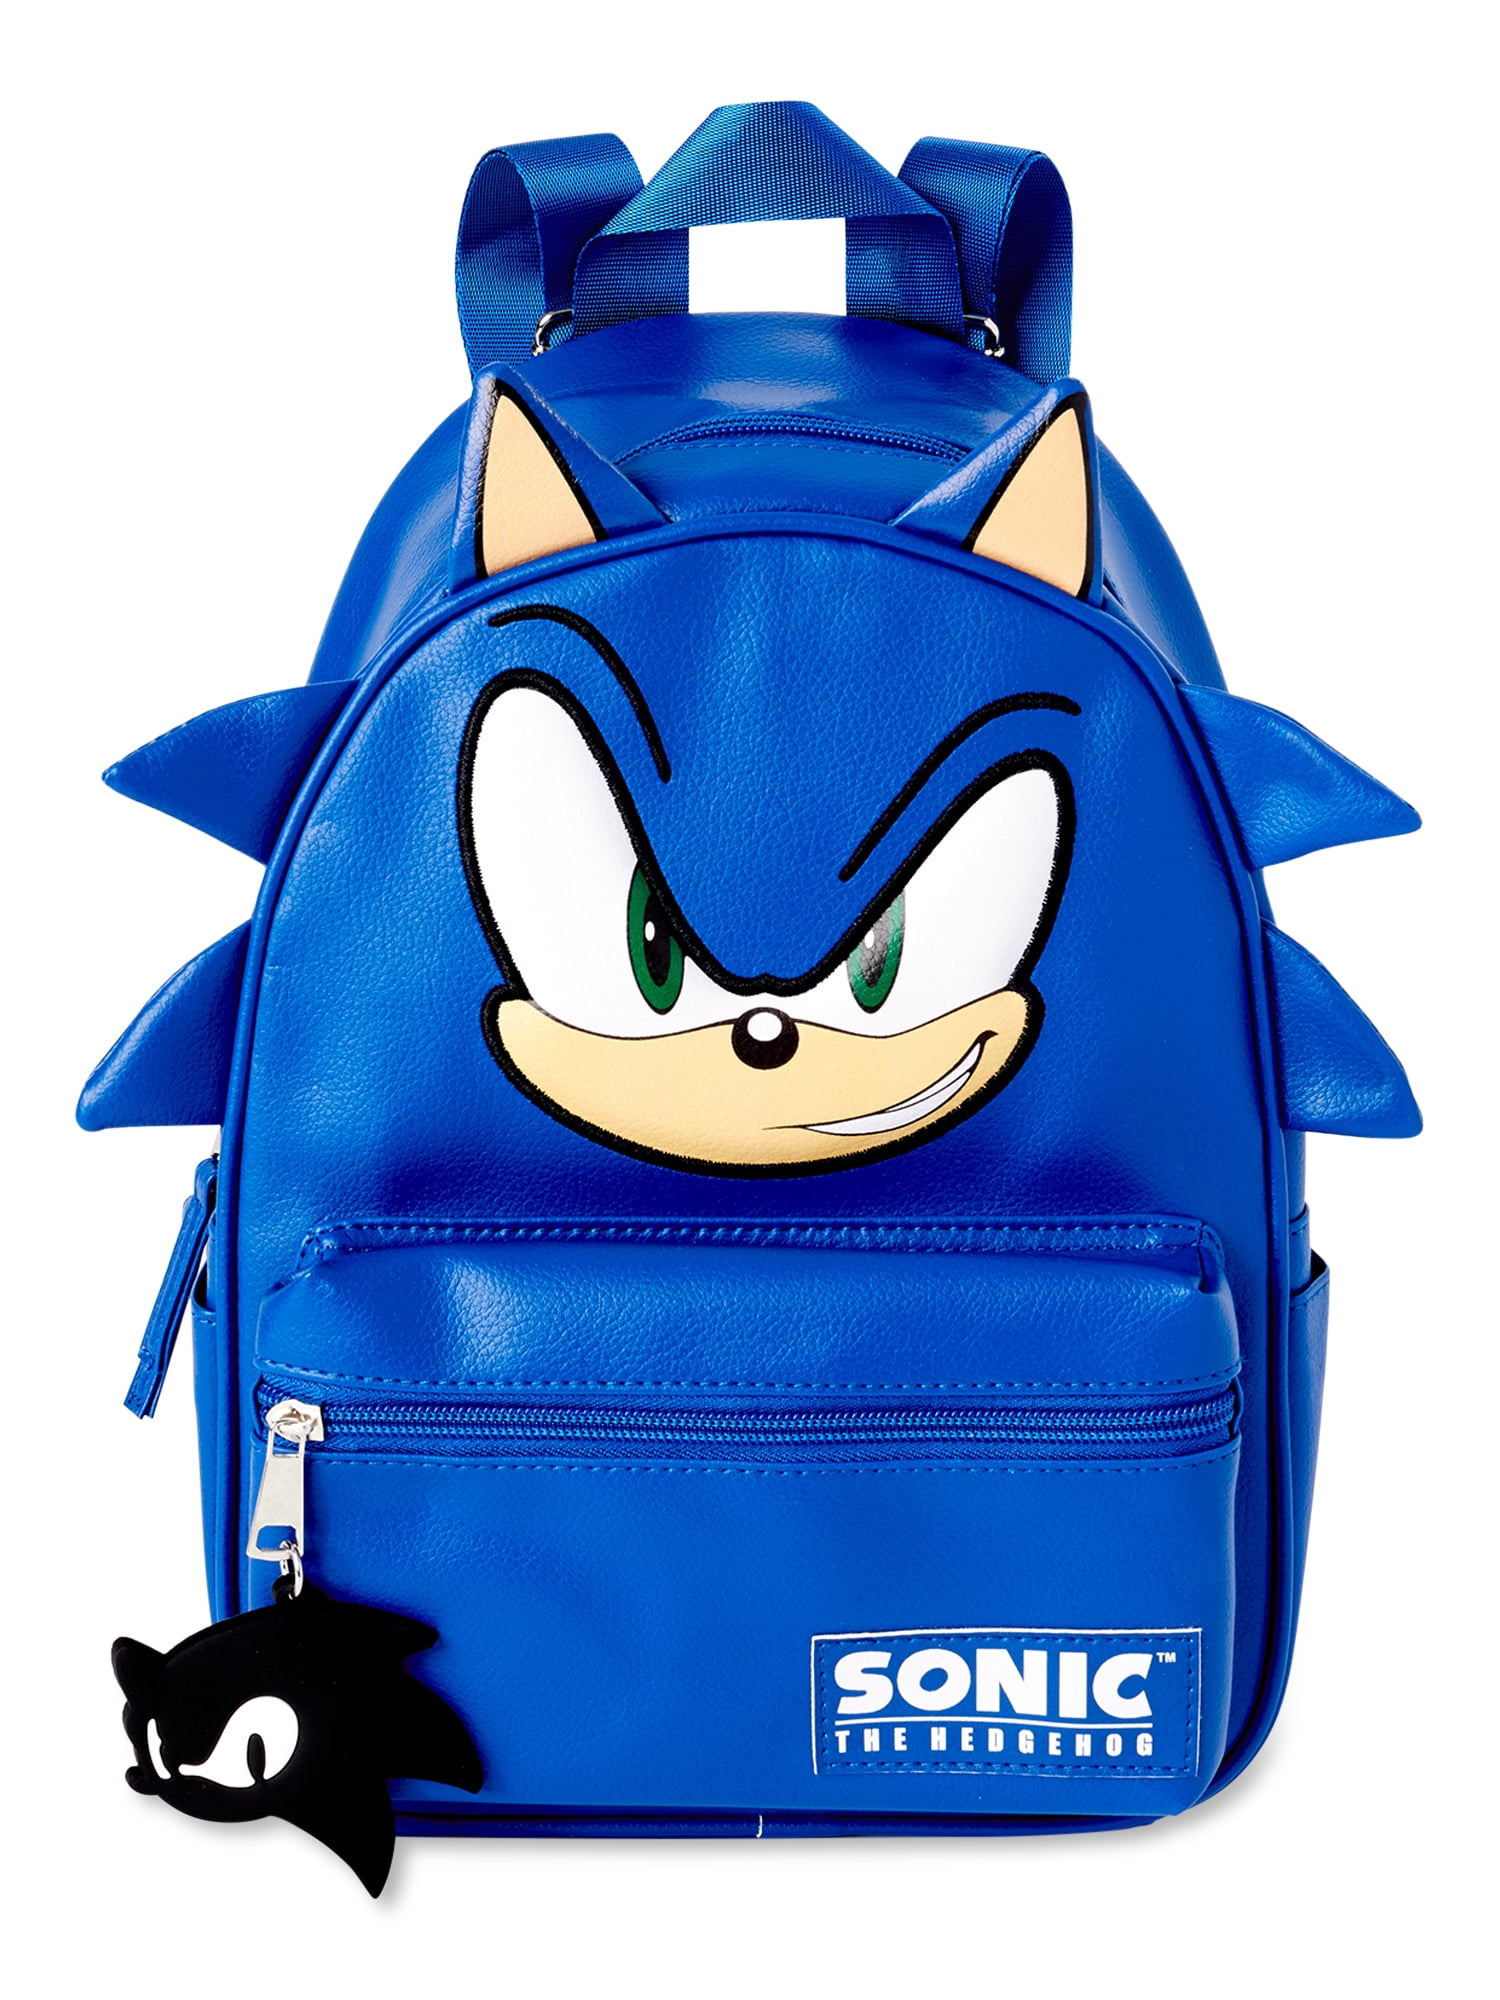 Son-Ic The Hedgehog Laptop Backpack School Bookbags Travel Daypack for Boy Girl Adult 